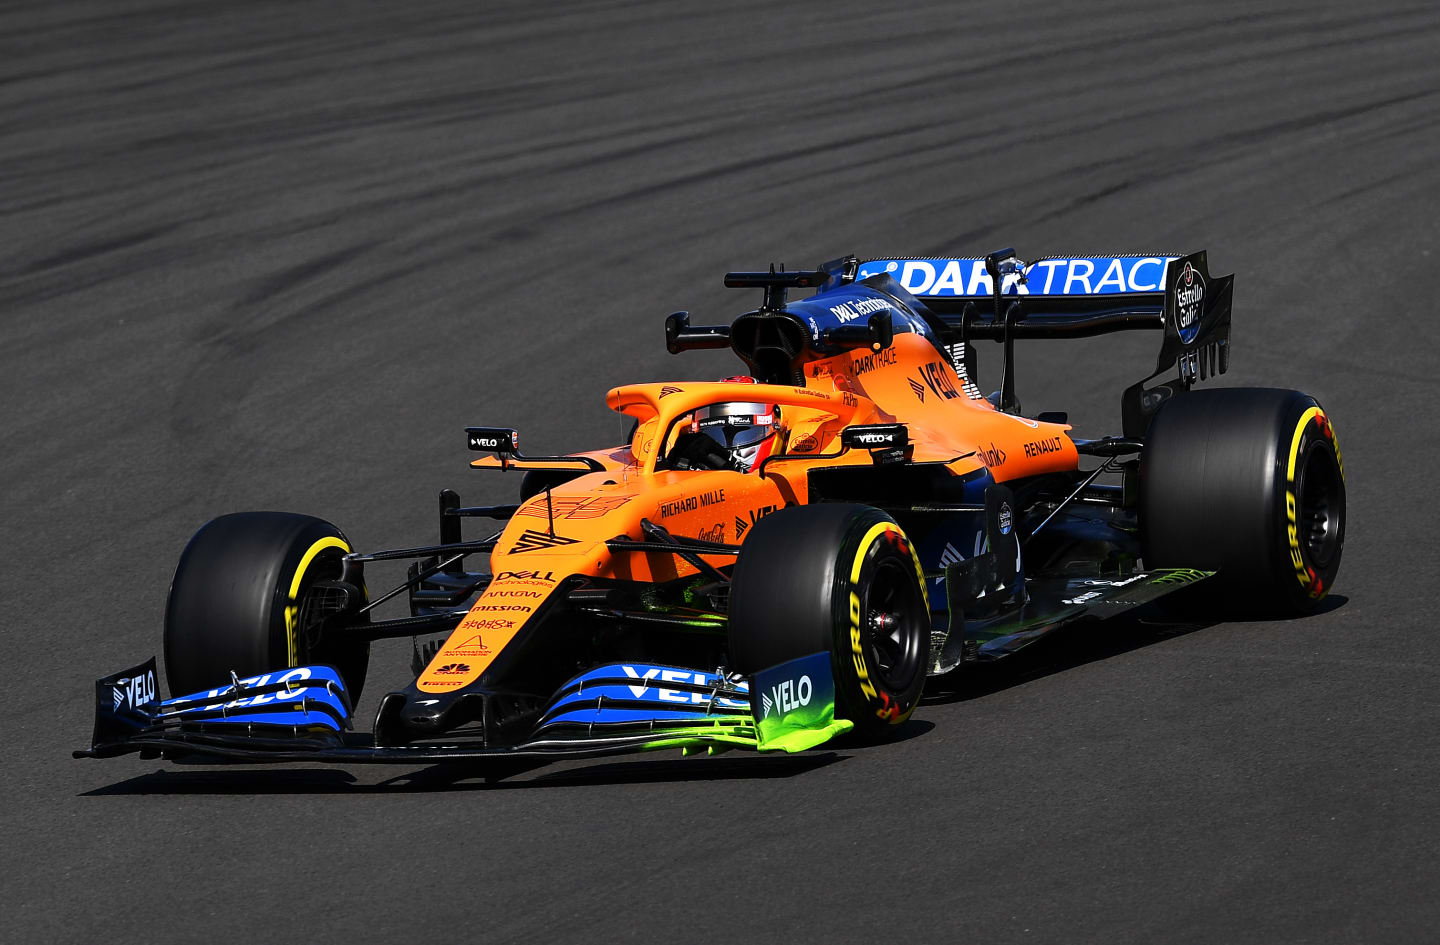 NORTHAMPTON, ENGLAND - JULY 31: Carlos Sainz of Spain driving the (55) McLaren F1 Team MCL35 Renault on track during practice for the F1 Grand Prix of Great Britain at Silverstone on July 31, 2020 in Northampton, England. (Photo by Ben Stansall/Pool via Getty Images)